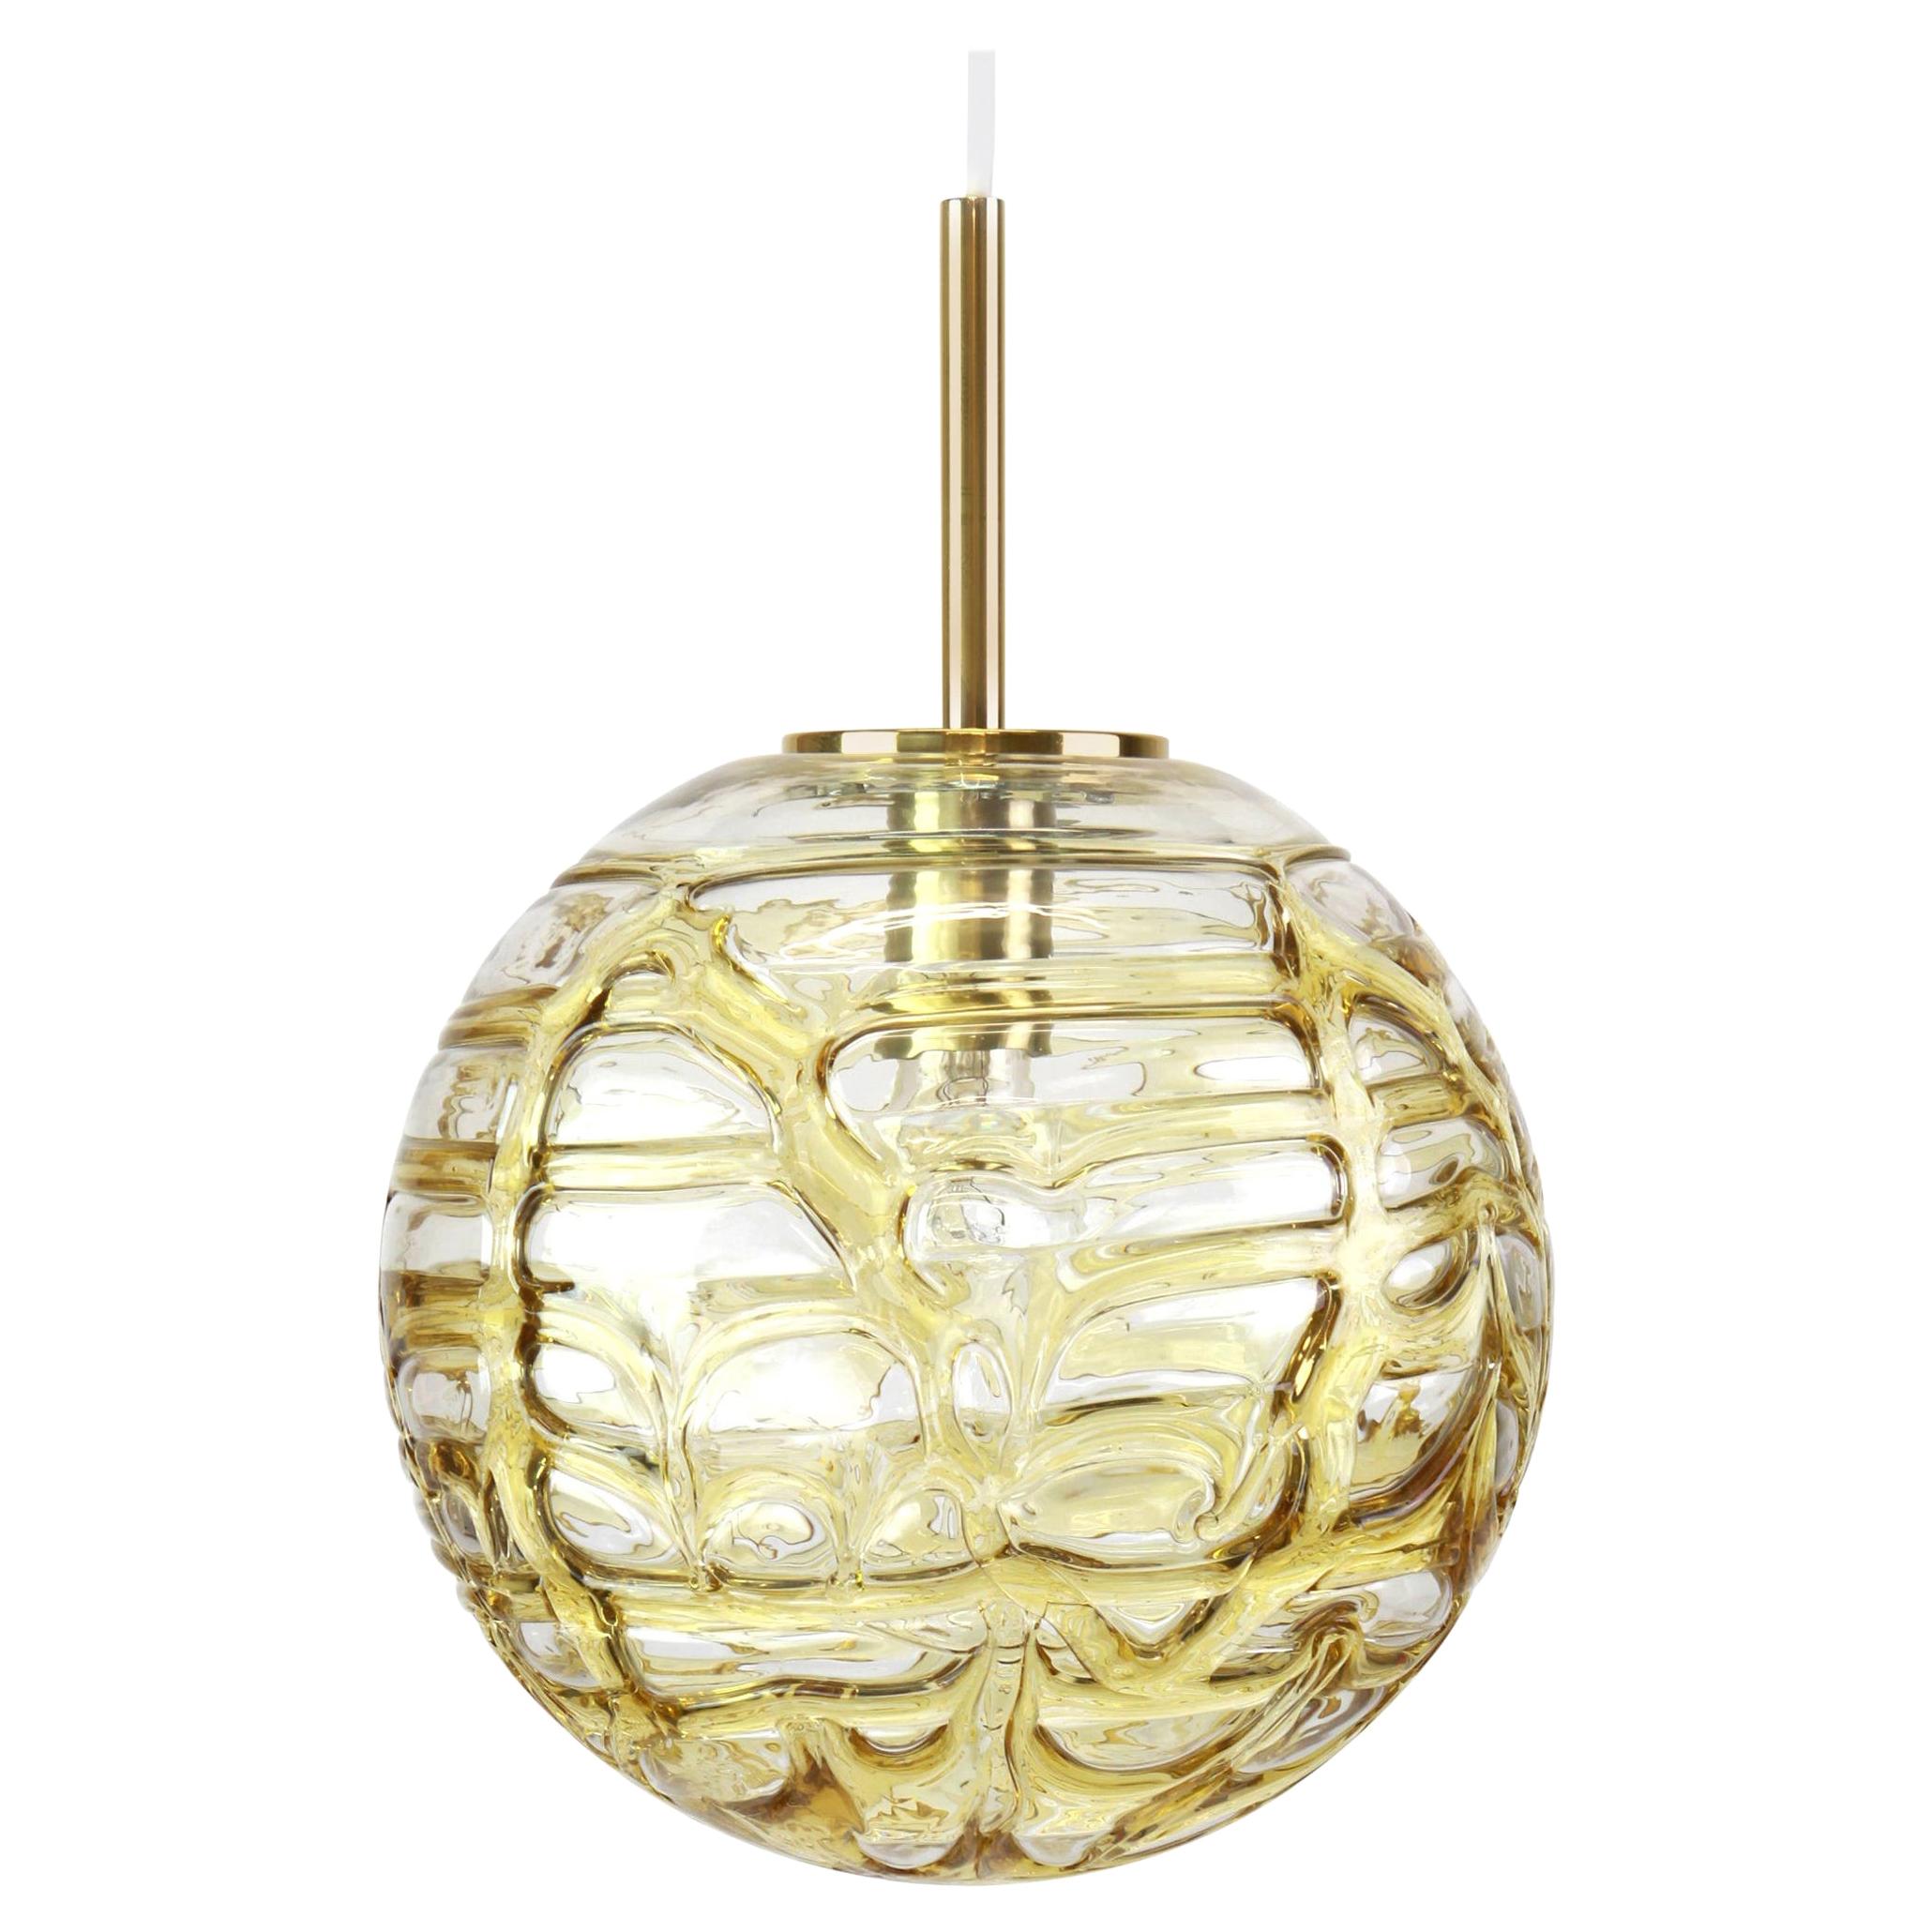 Doria ceiling light with large volcanic Murano glass ball.
High quality of materials, gives a wonderful light effect when it is on.

High quality and in very good condition. Cleaned, well-wired and ready to use. 

Sockets: One E27 standard